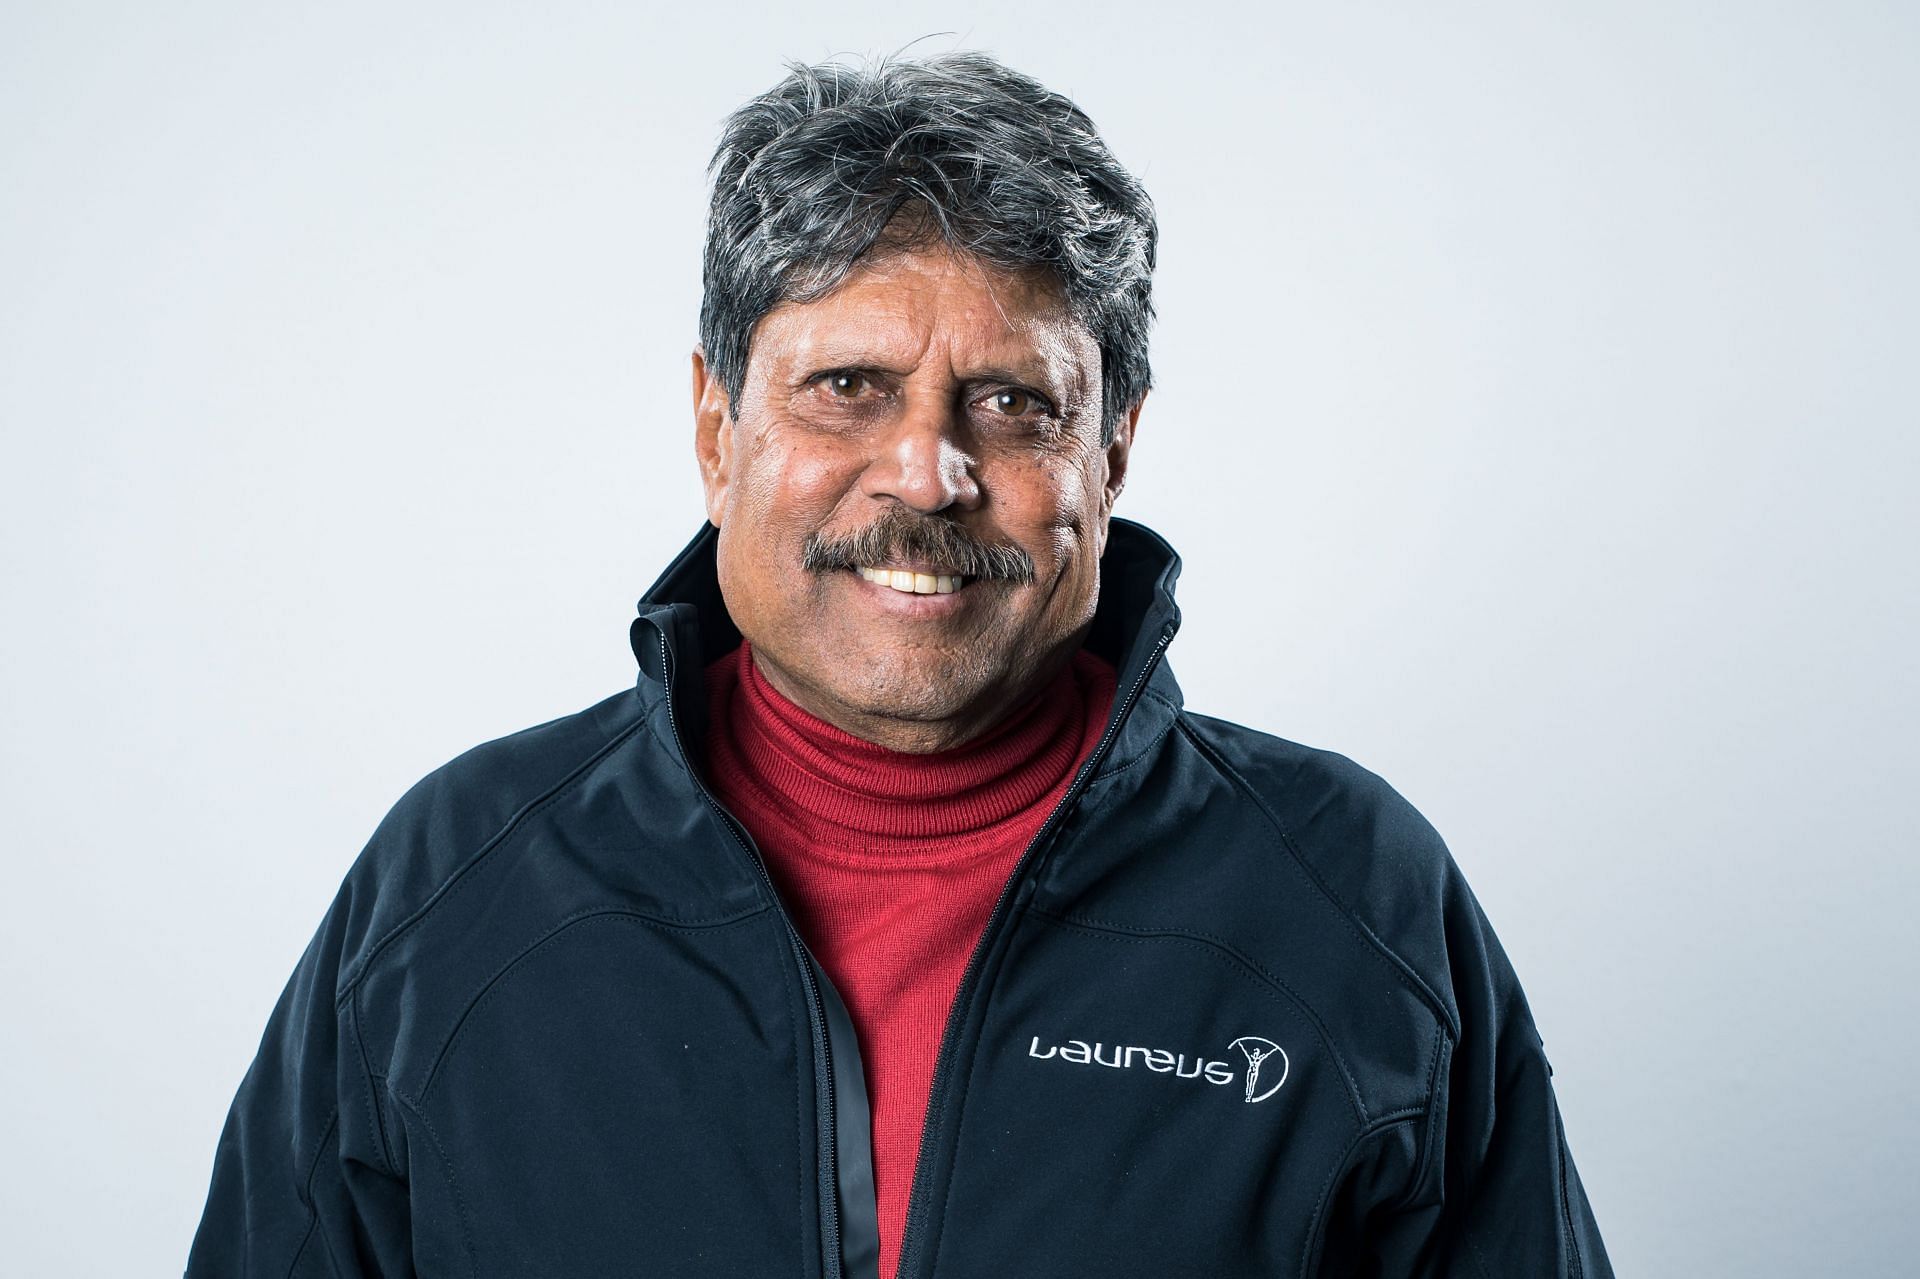 Kapil Dev captained India in the 1983 World Cup